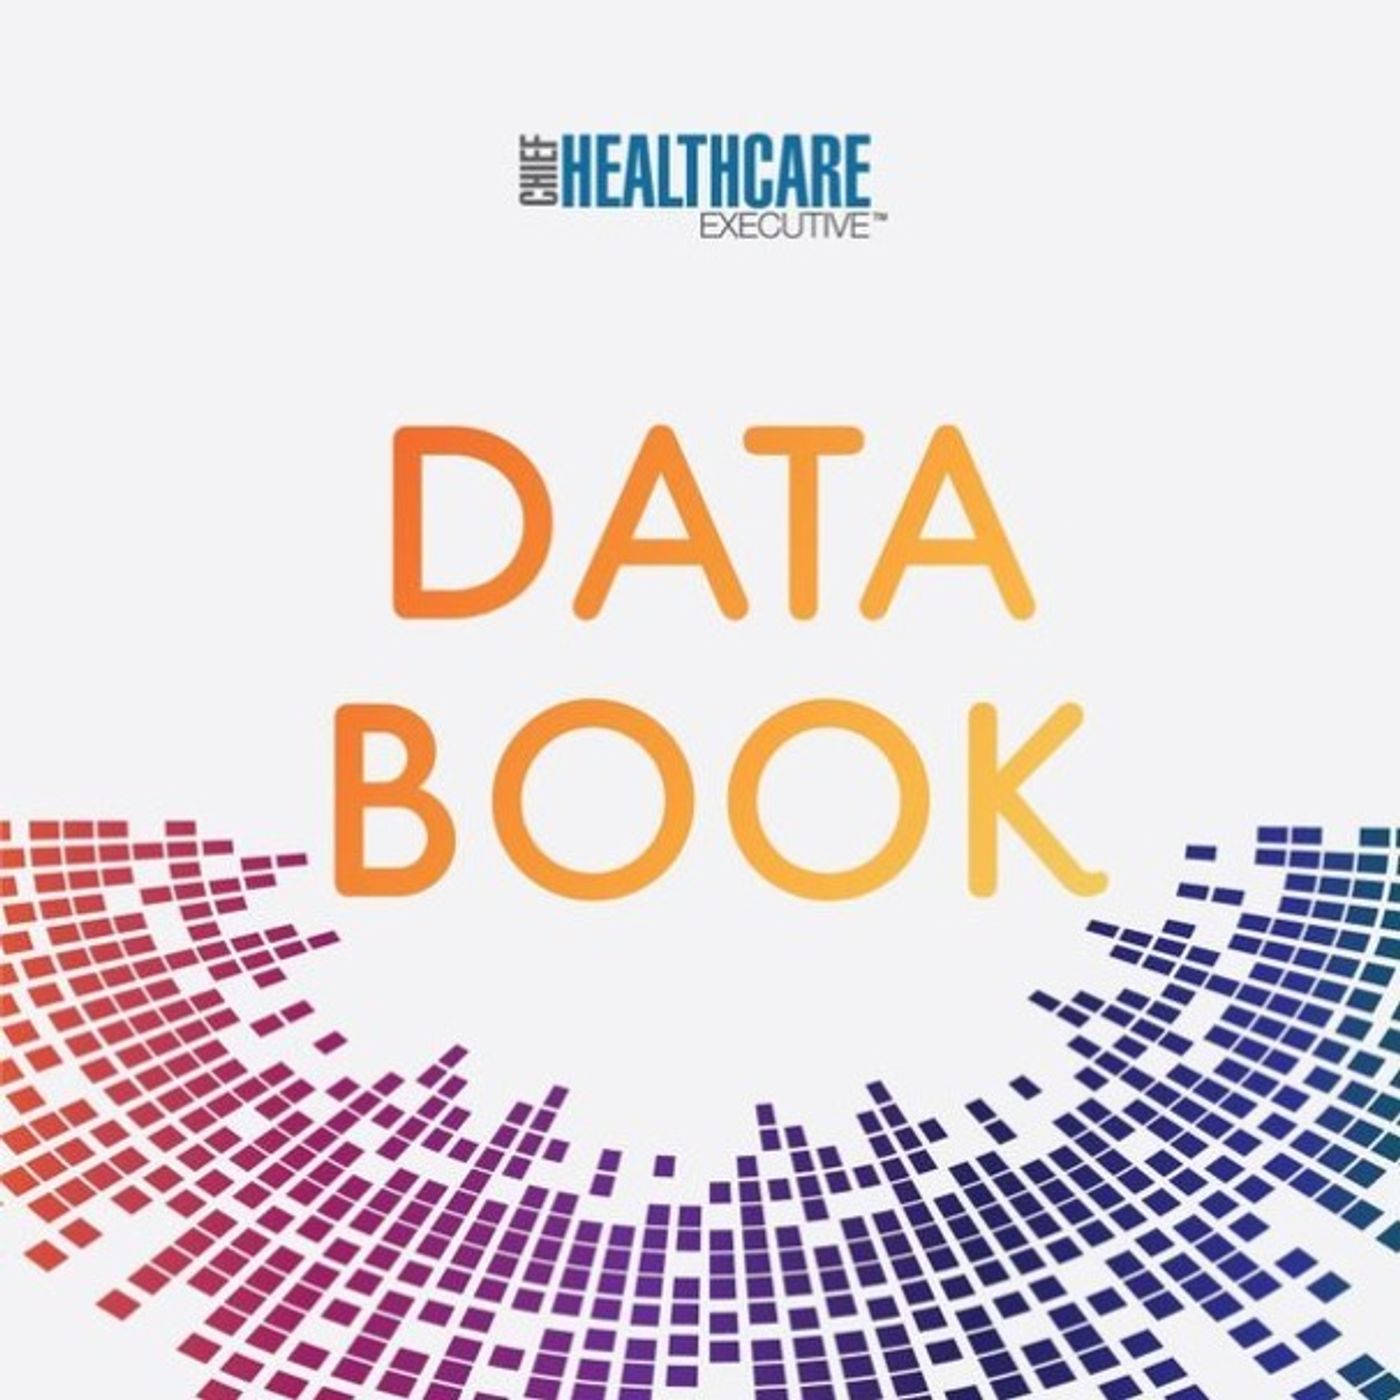 S7 Ep20: Data Book: Hospitals and health systems face evolving cybersecurity threats